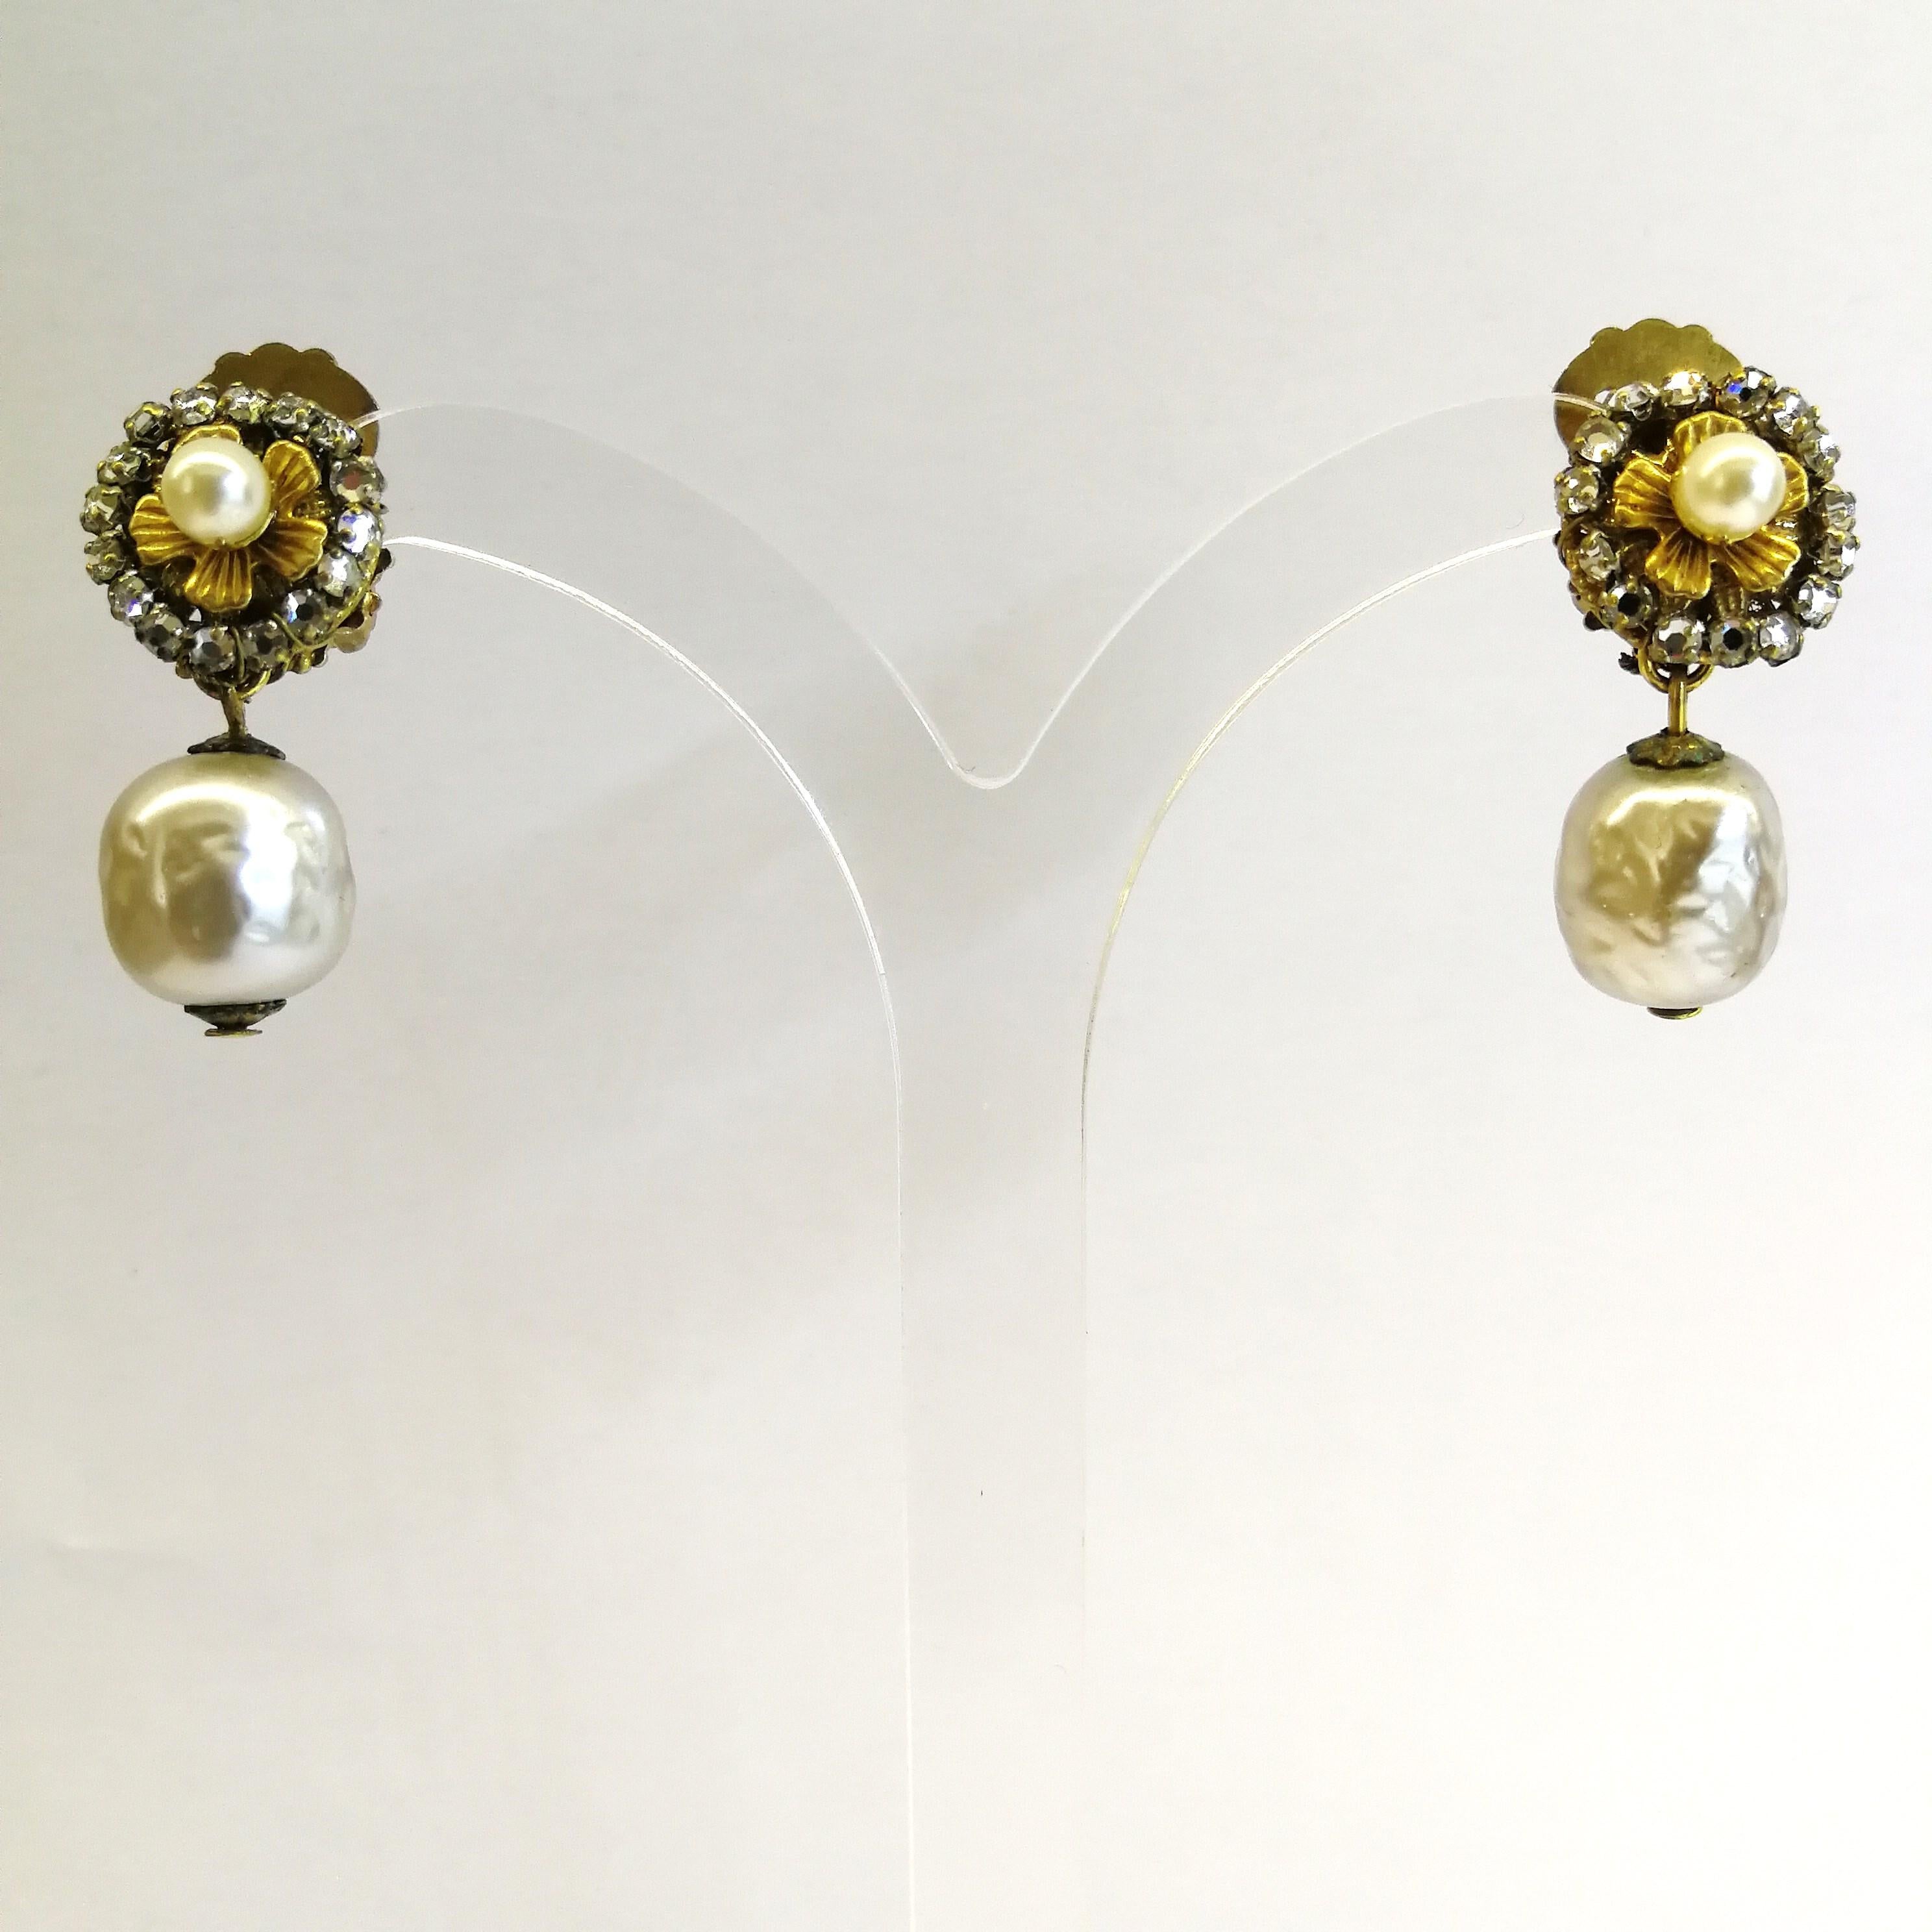 A necklace and earrings of gilded metal, paste and baroque pearl, Miriam Haskell 7